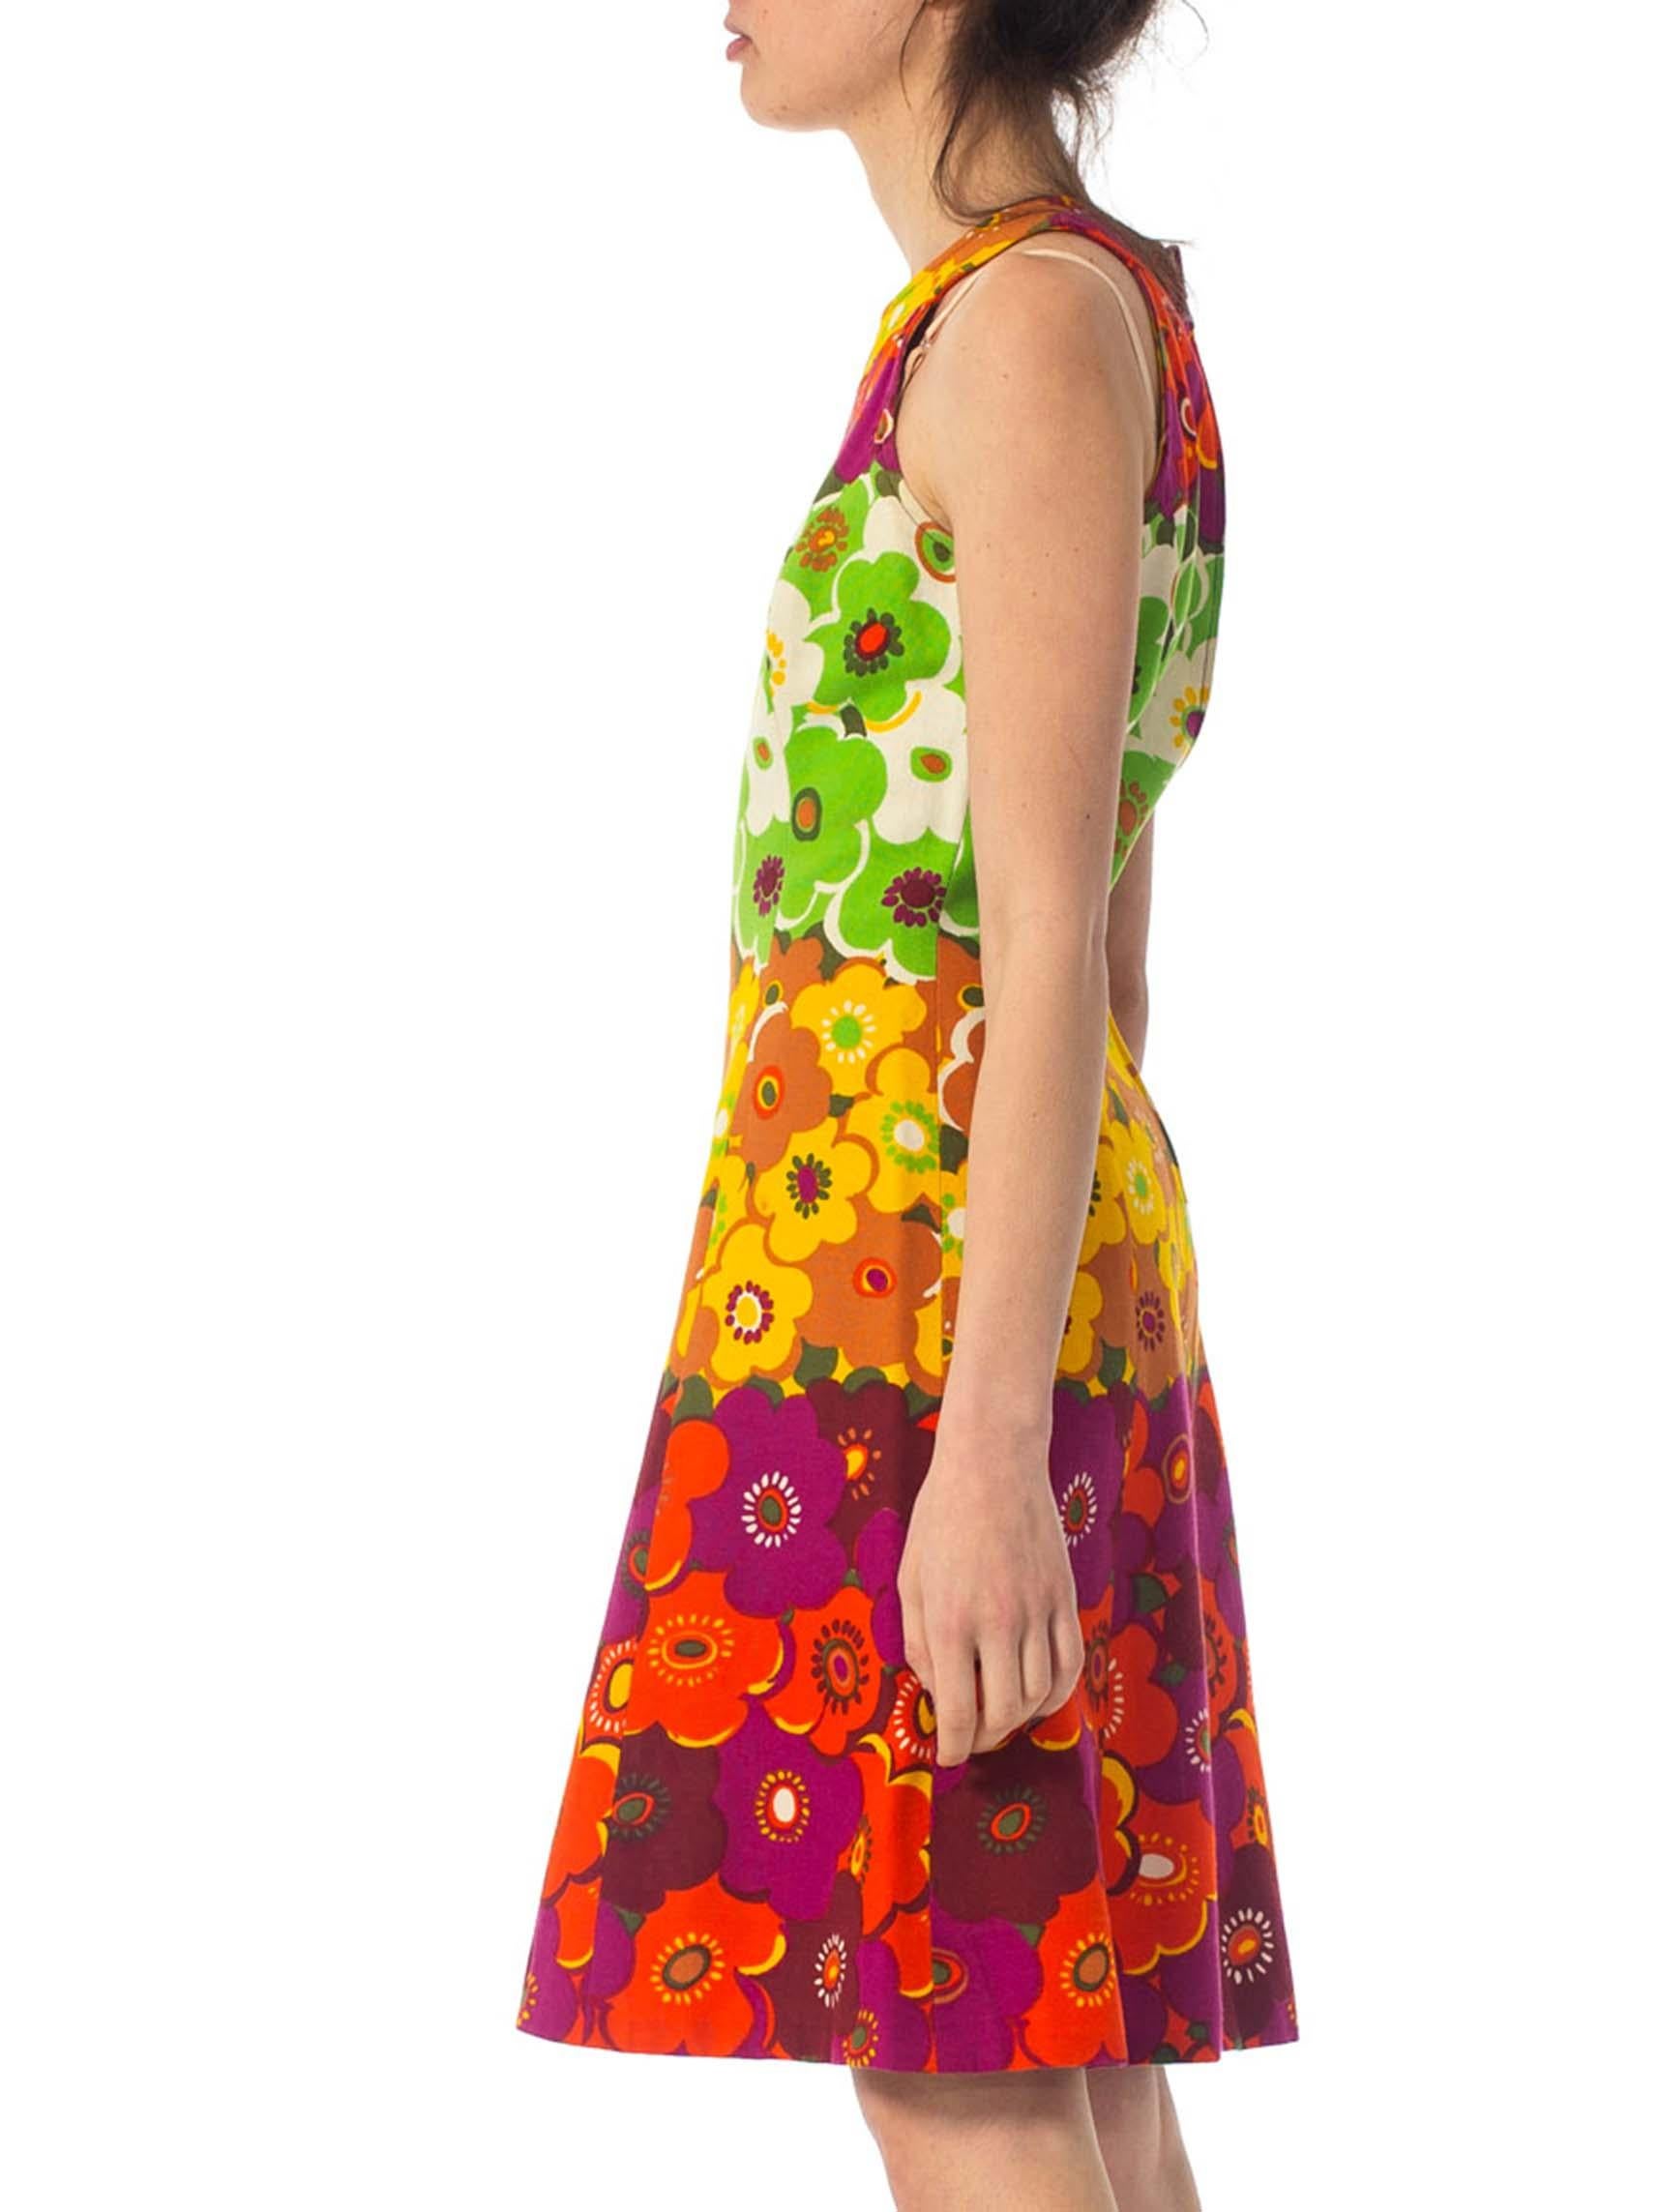 1960S Floral Cotton Mod Dress In Excellent Condition For Sale In New York, NY